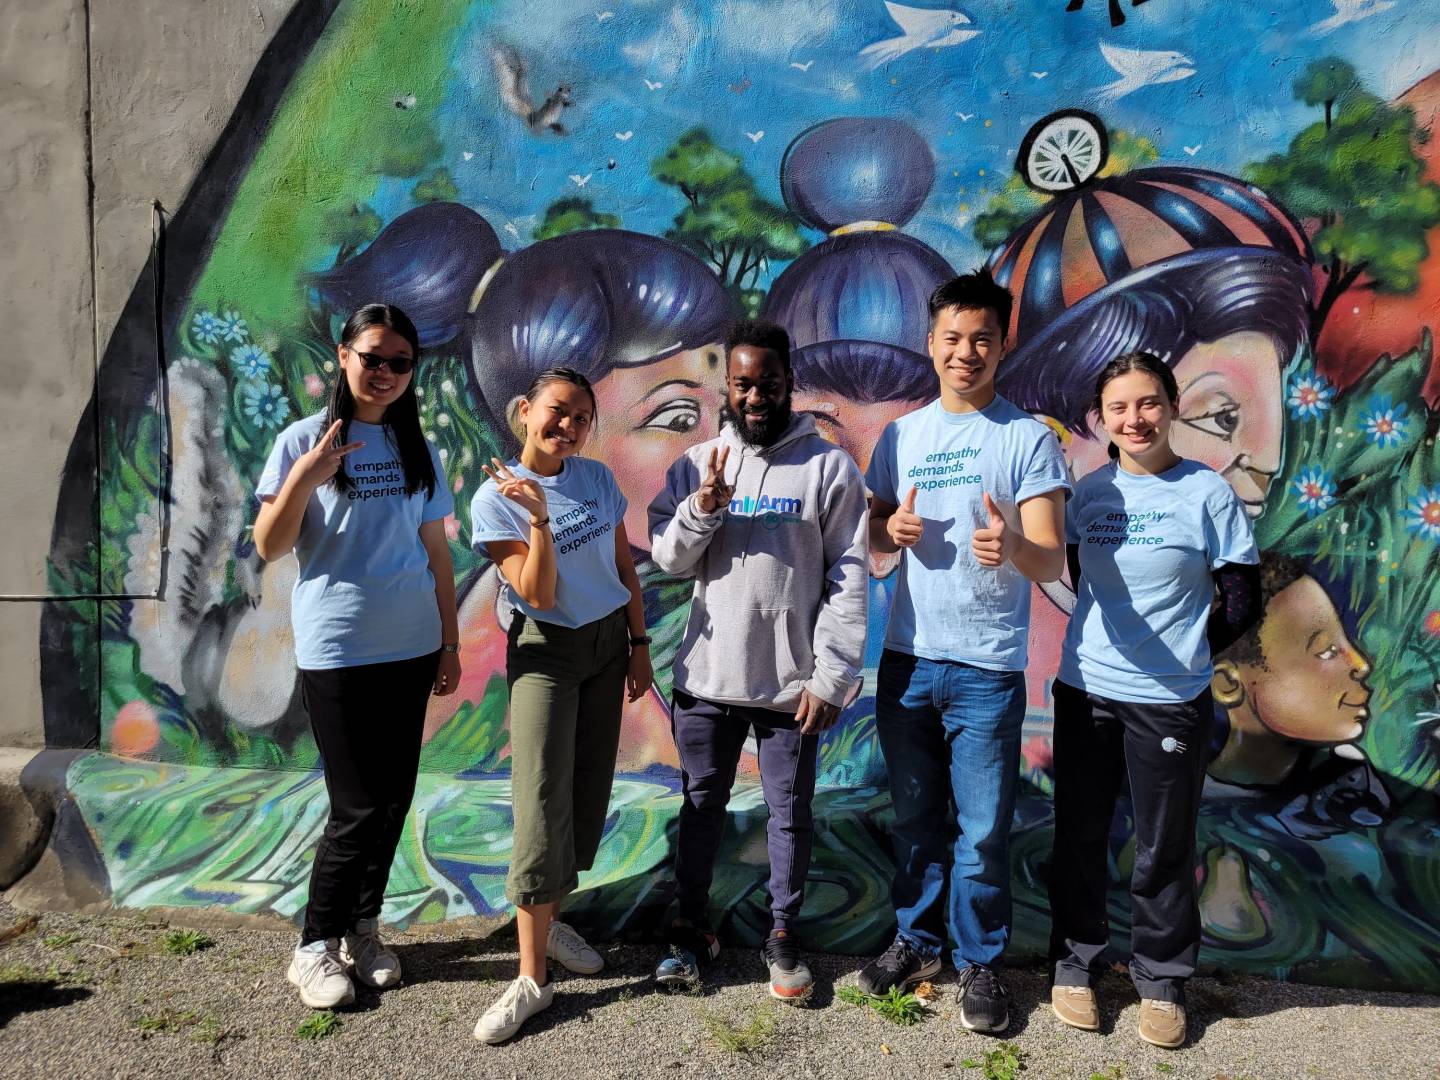 Students pose in front of a mural in Trenton